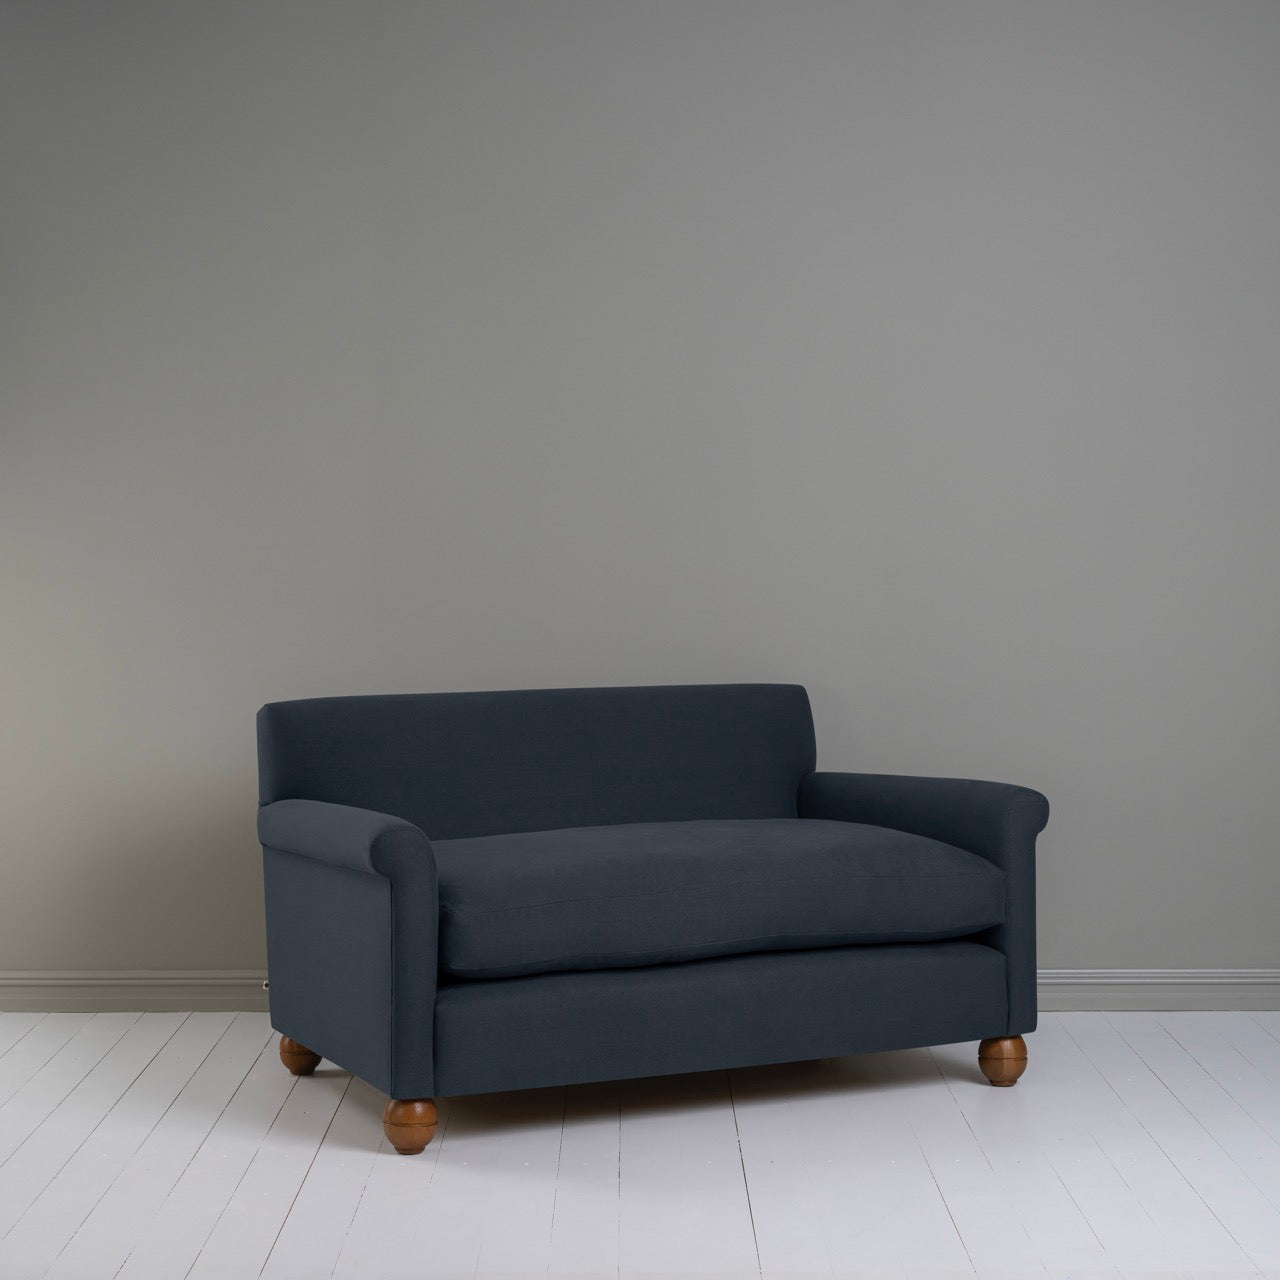 Idler 2 Seater Sofa in Laidback Linen Midnight